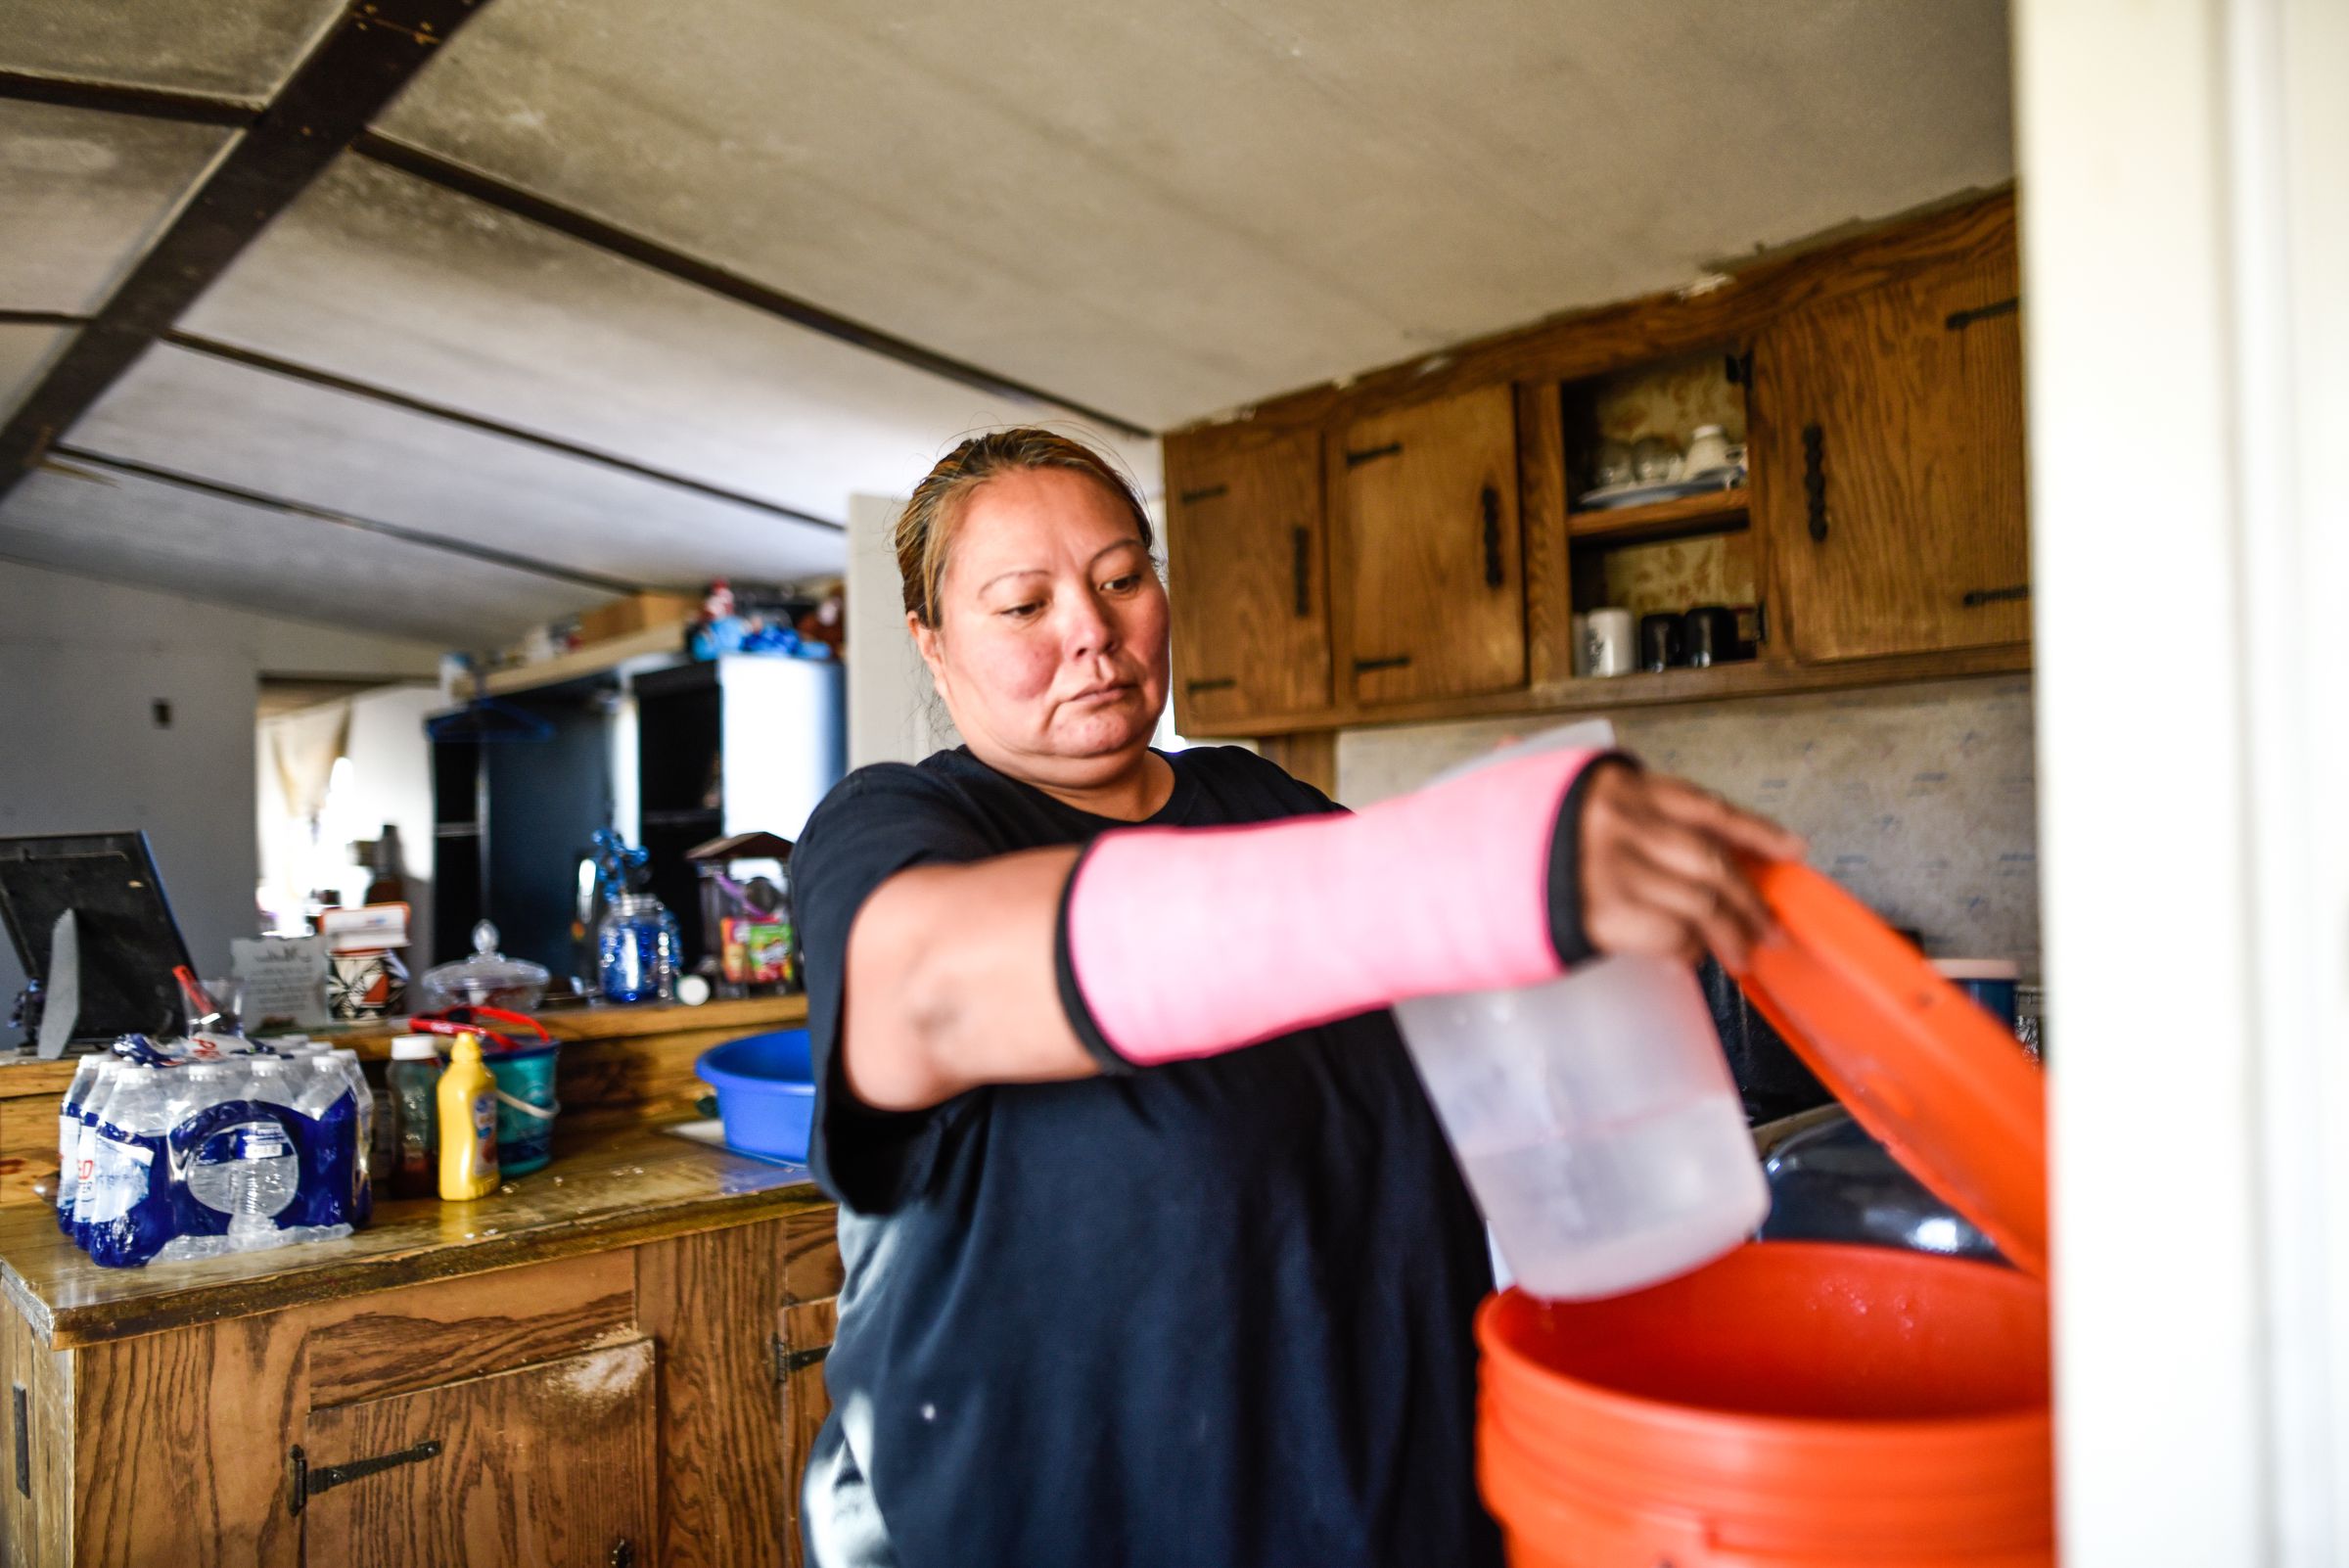 Rosanda Hudson prepares water for cooking in her home on the Navajo Nation prior to the installation of a home water system in 2017.